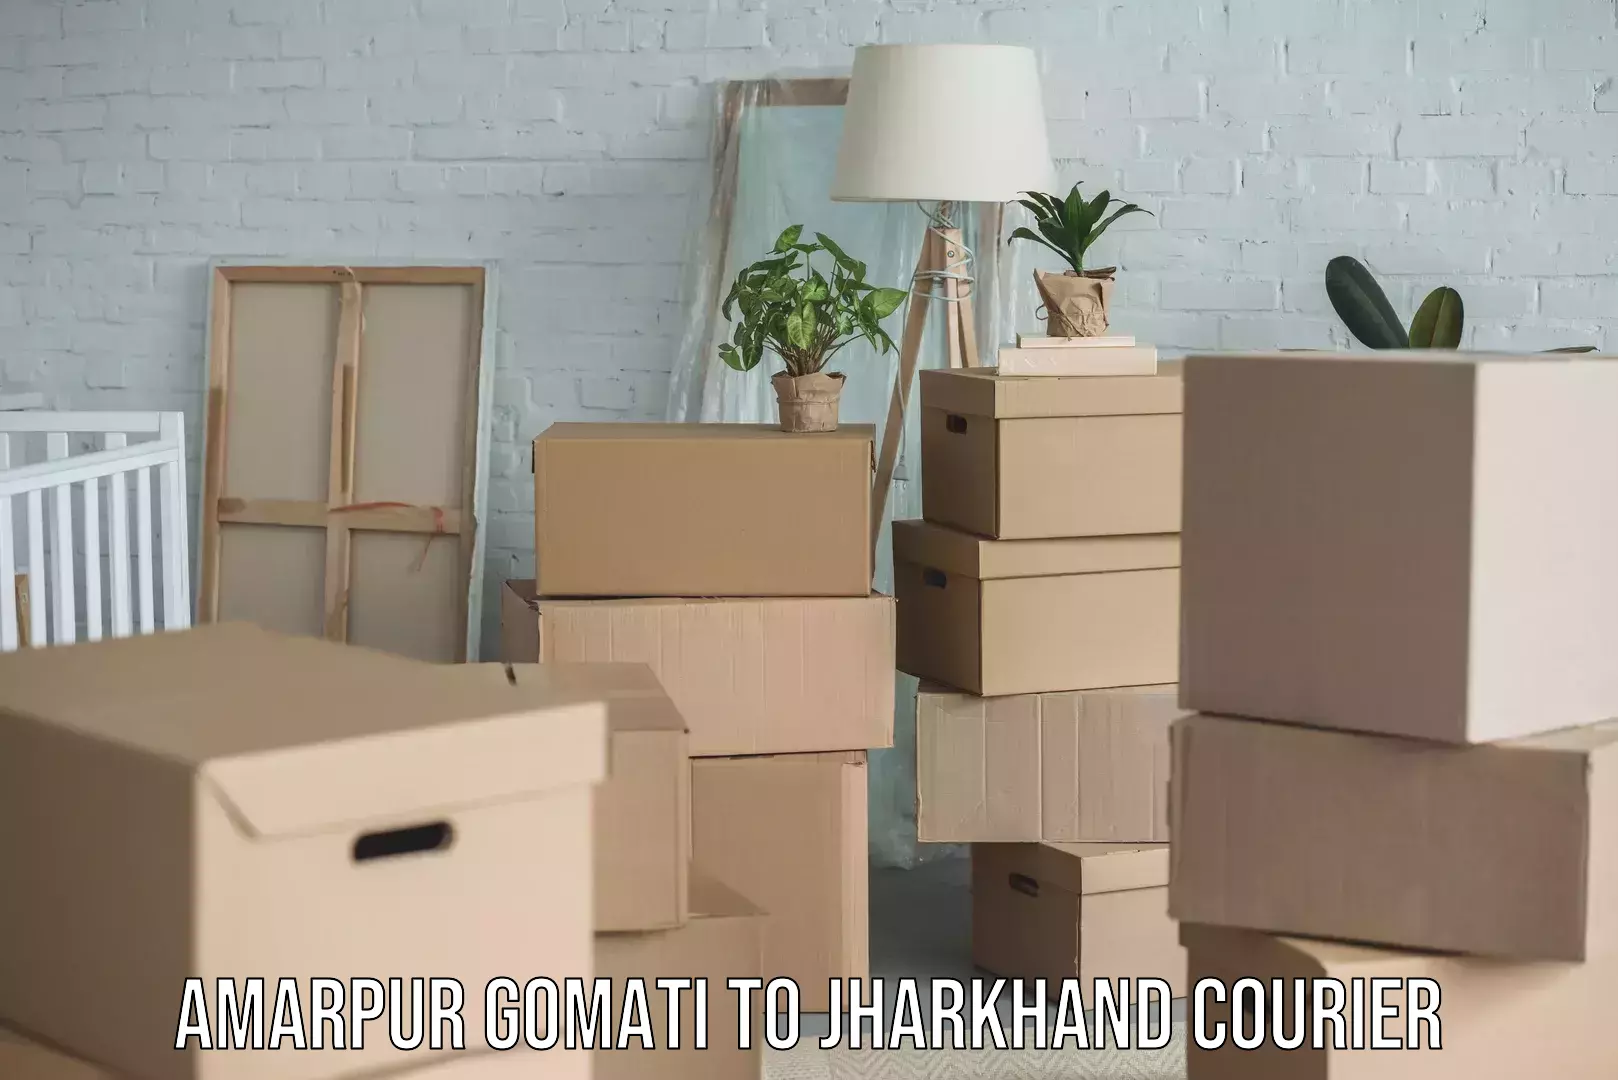 Express package handling Amarpur Gomati to Jharkhand